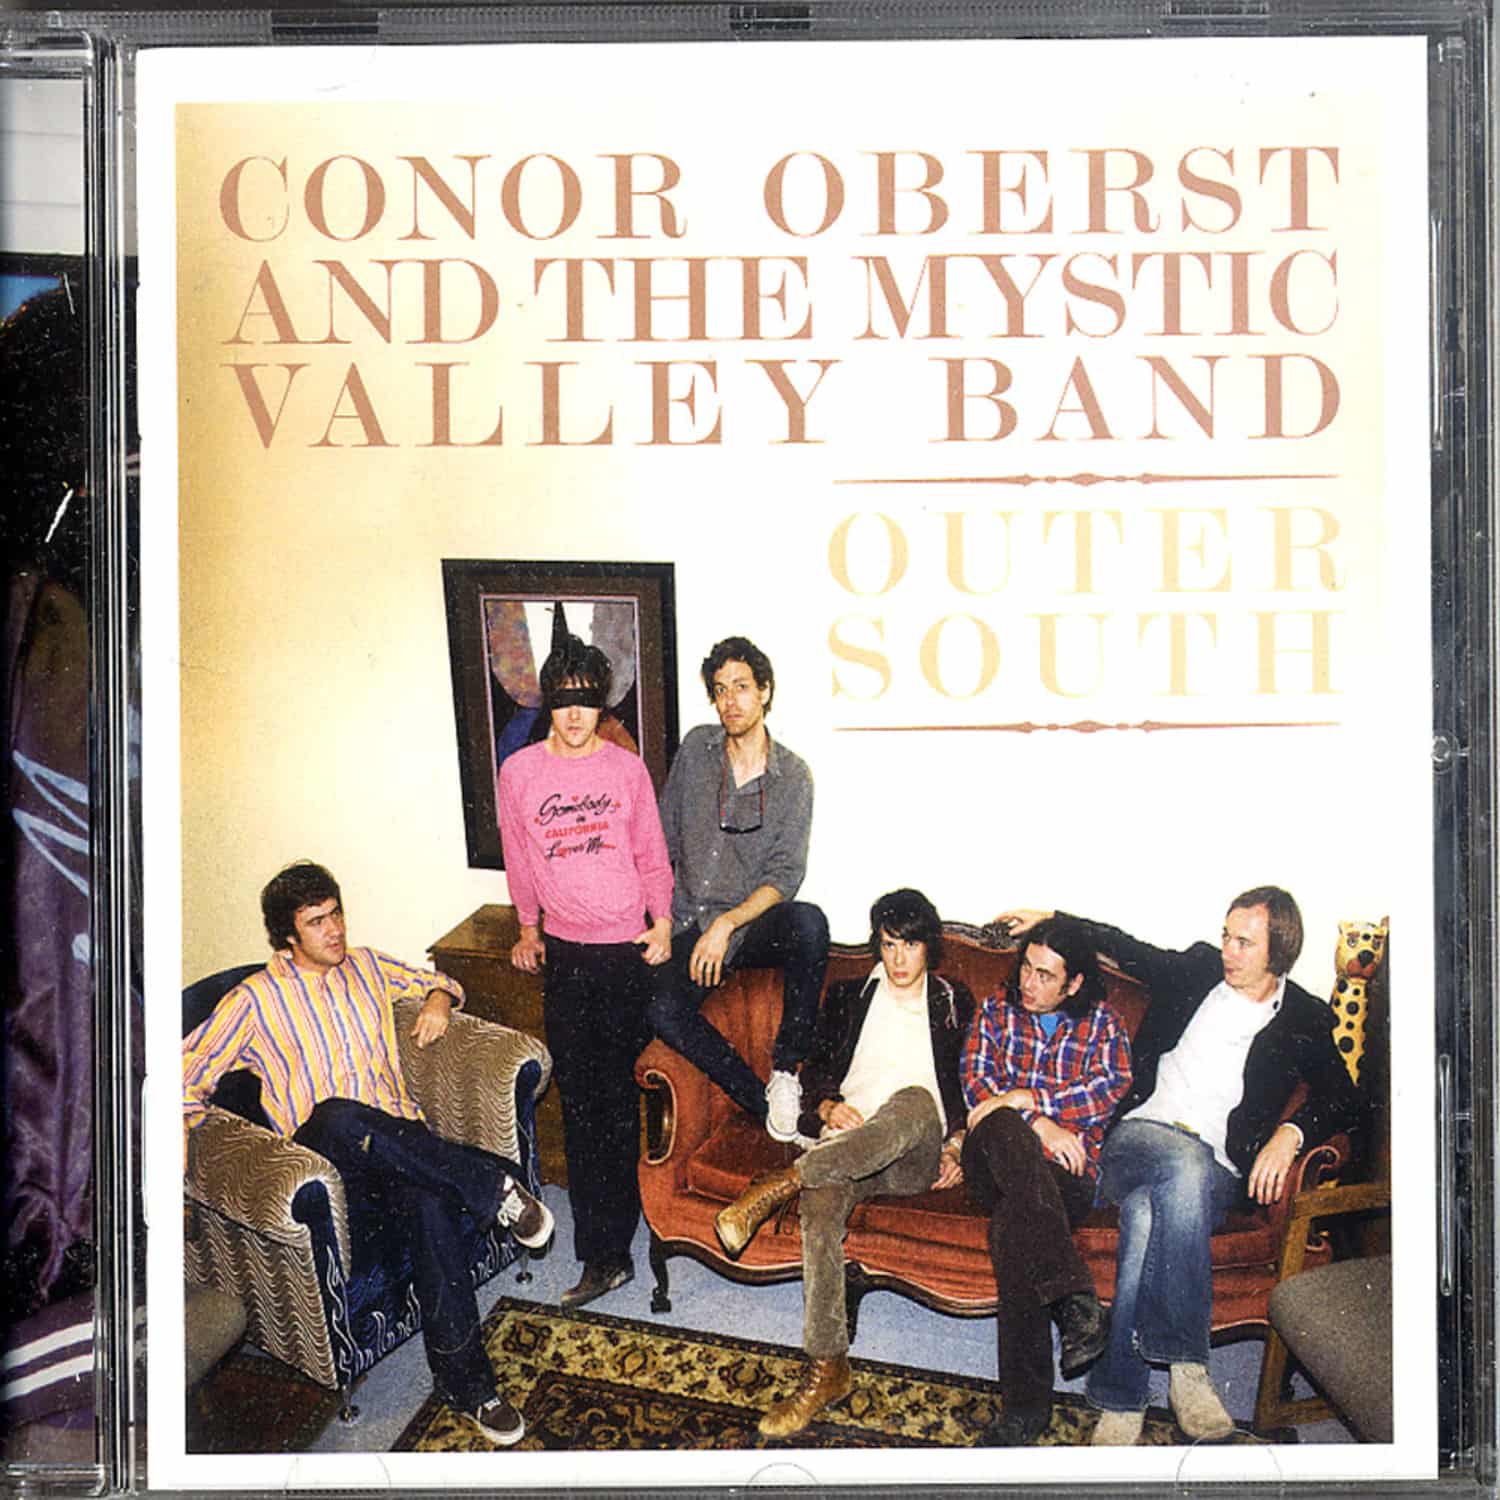 Conor Oberst And The Mystic Valley Band - OUTER SOUTH 